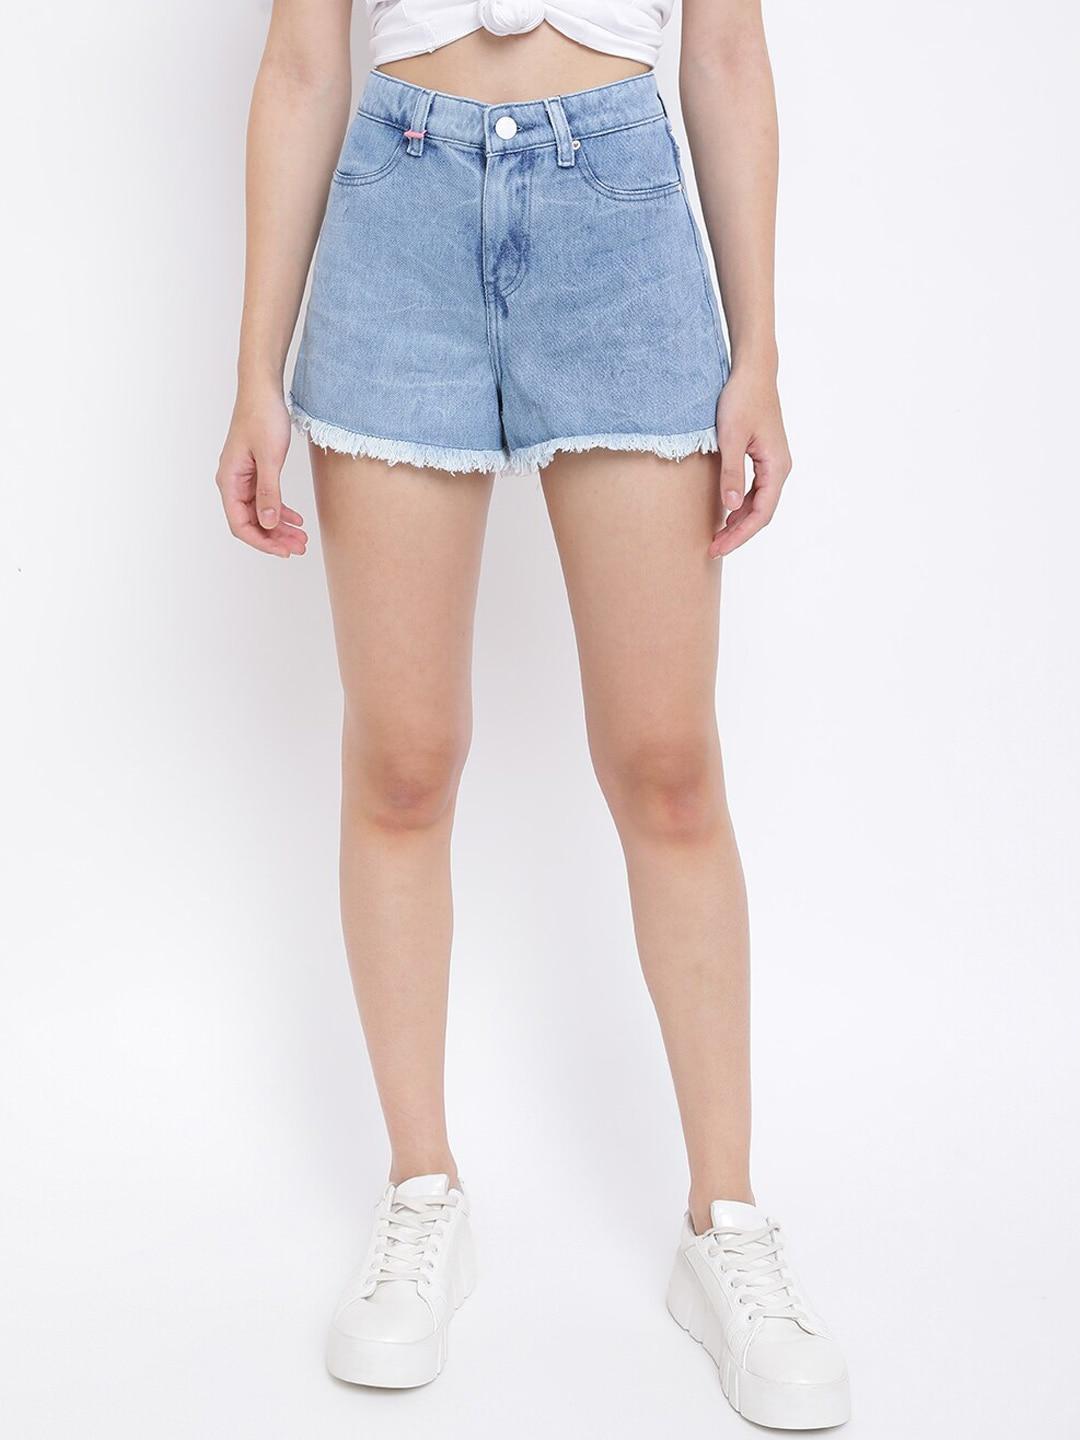 TALES & STORIES Women Washed Outdoor Denim Shorts